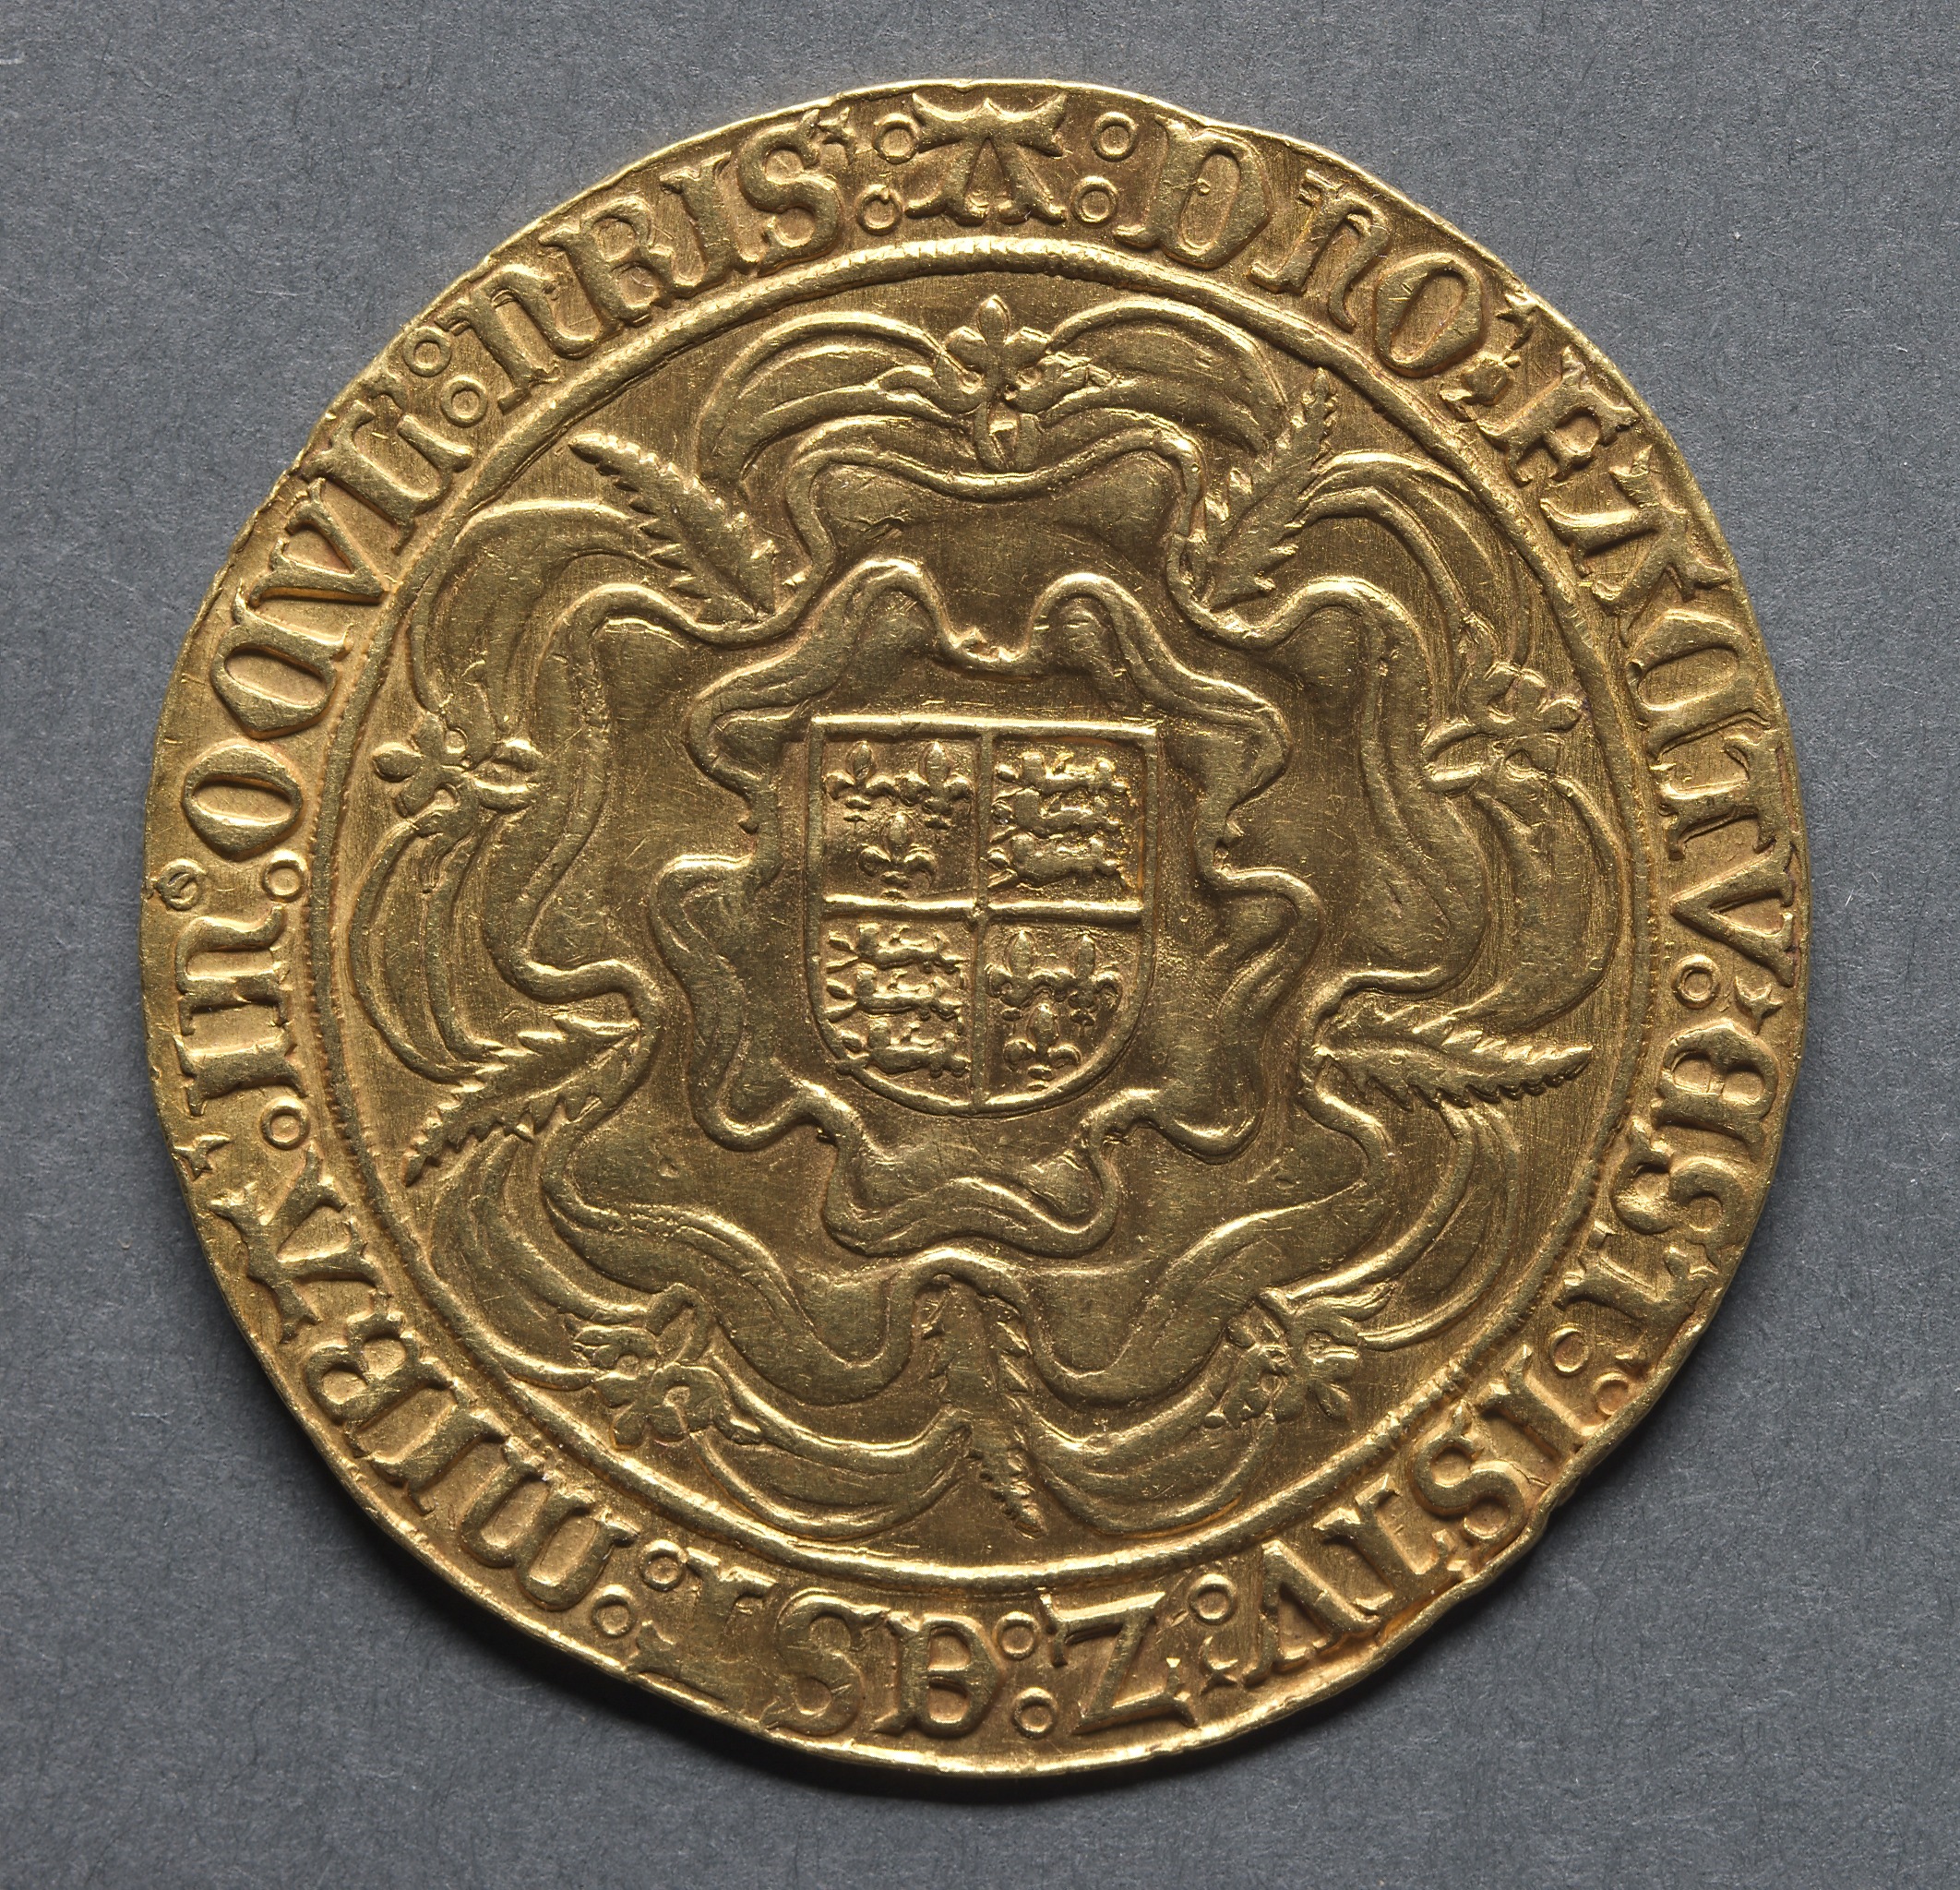 Sovereign: Shield of Royal Arms on a Tudor Rose (reverse)